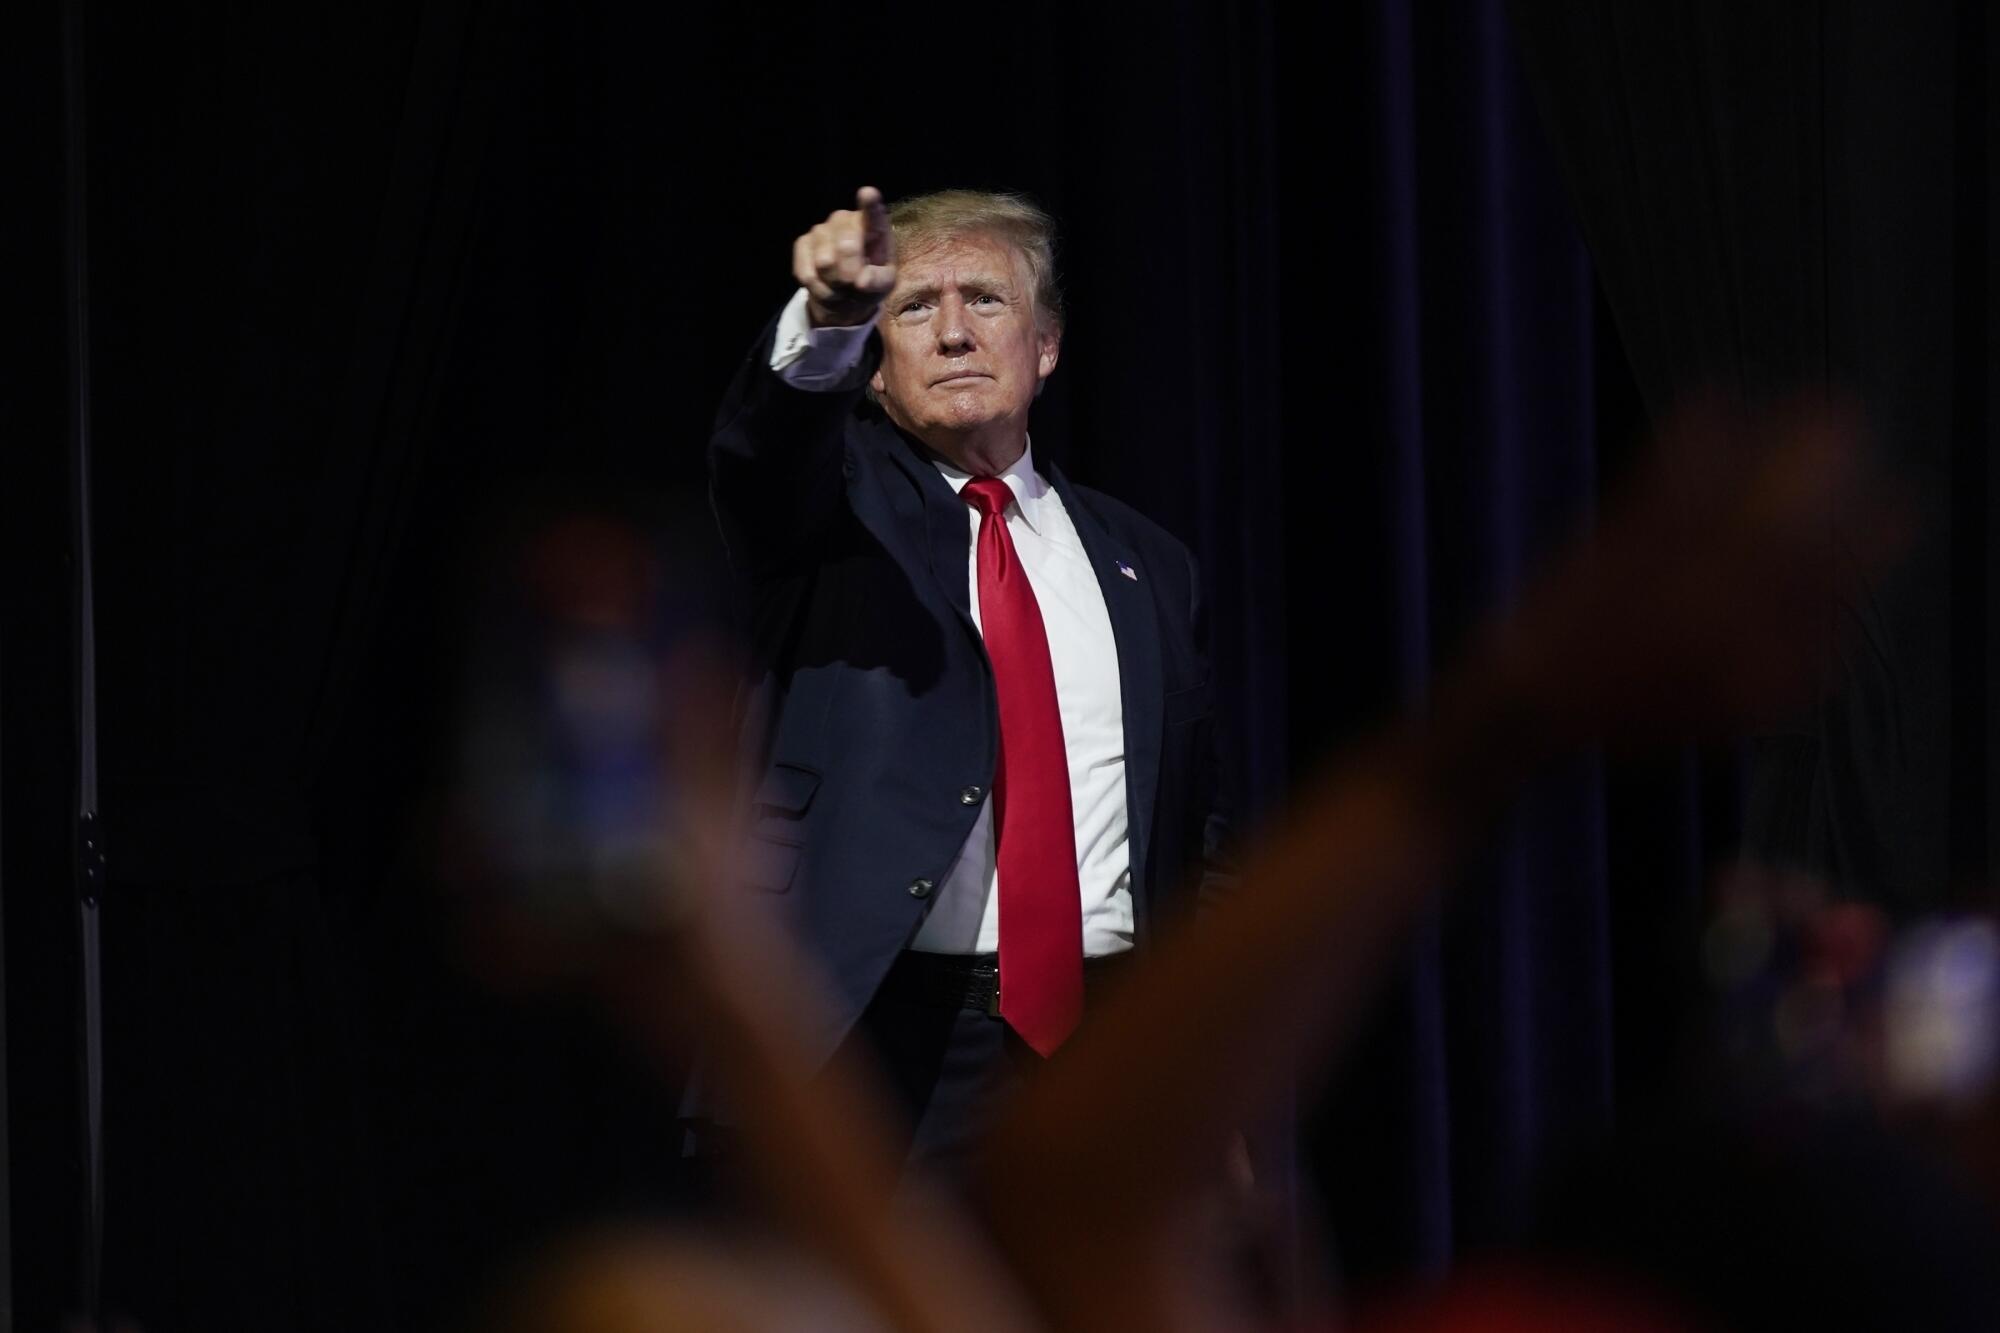 Donald Trump, framed by blurred heads in a crowd, standing and pointing